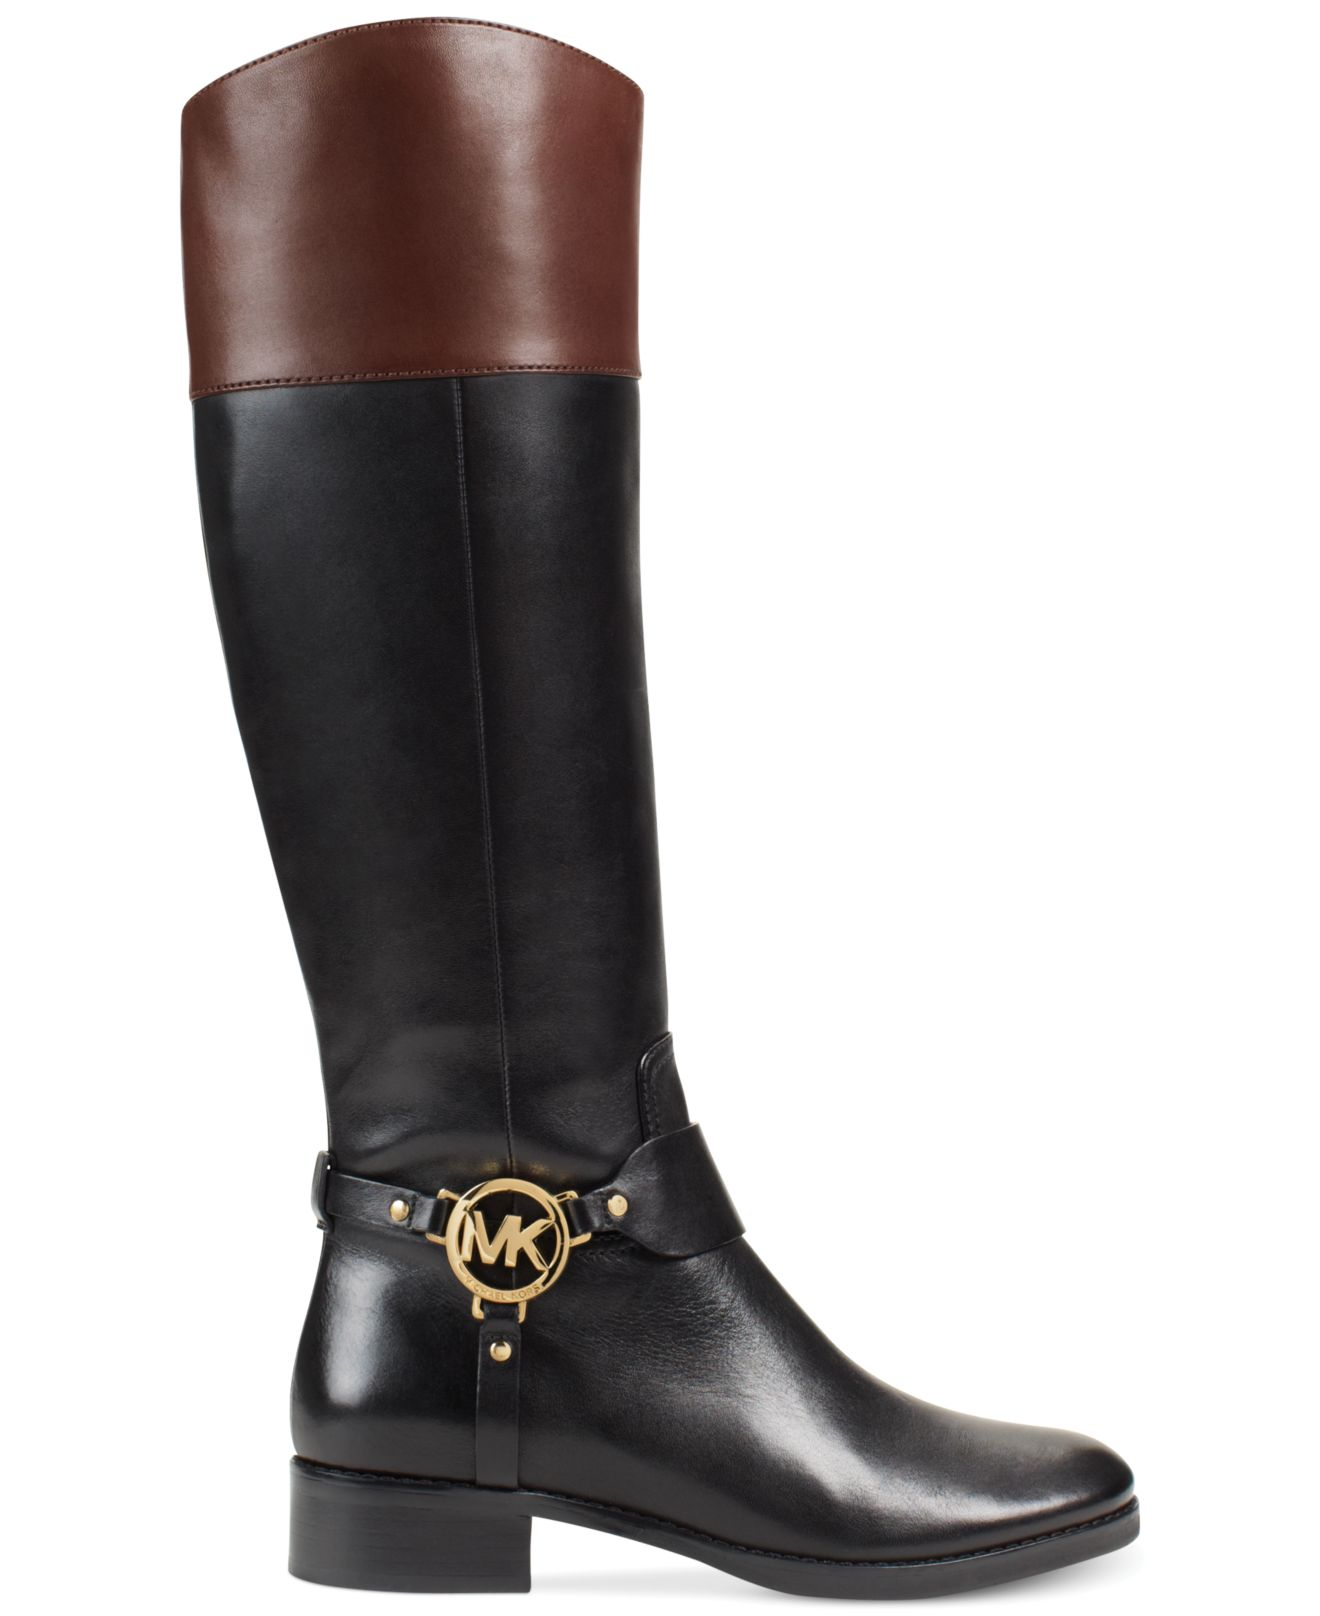 mk brown and black boots